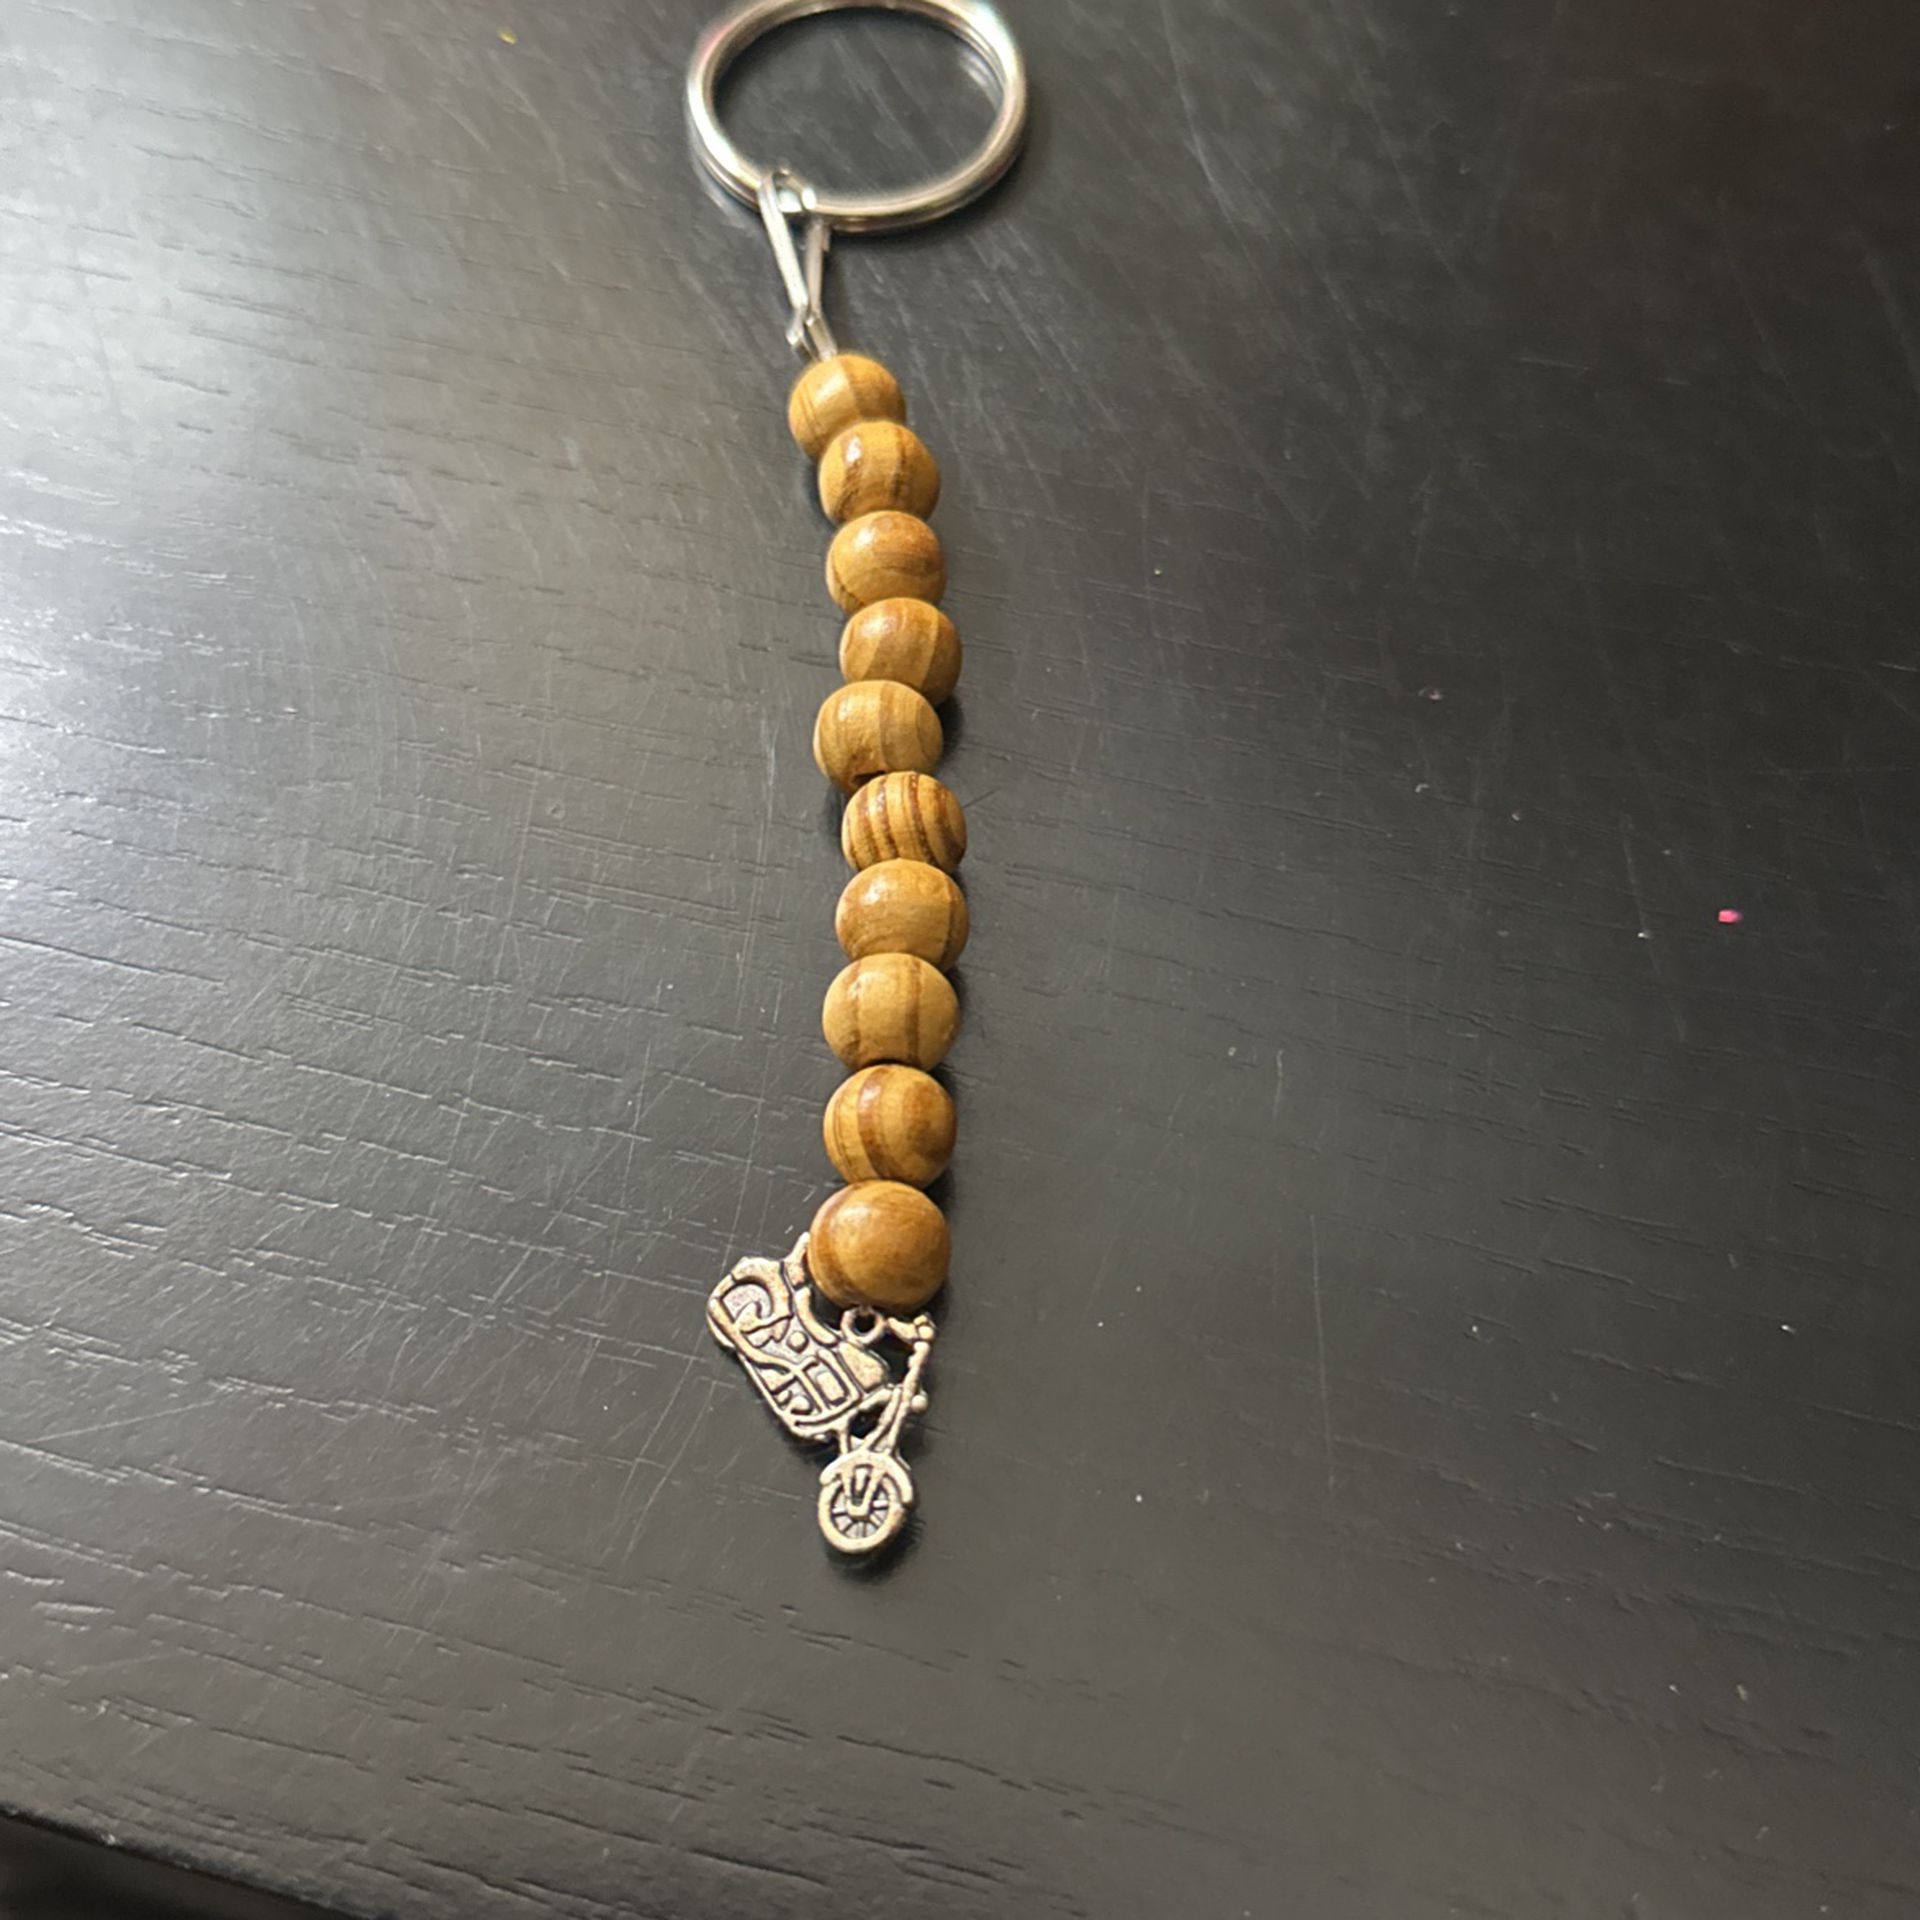 Would Beads With A Motorcycle Charm Keychain